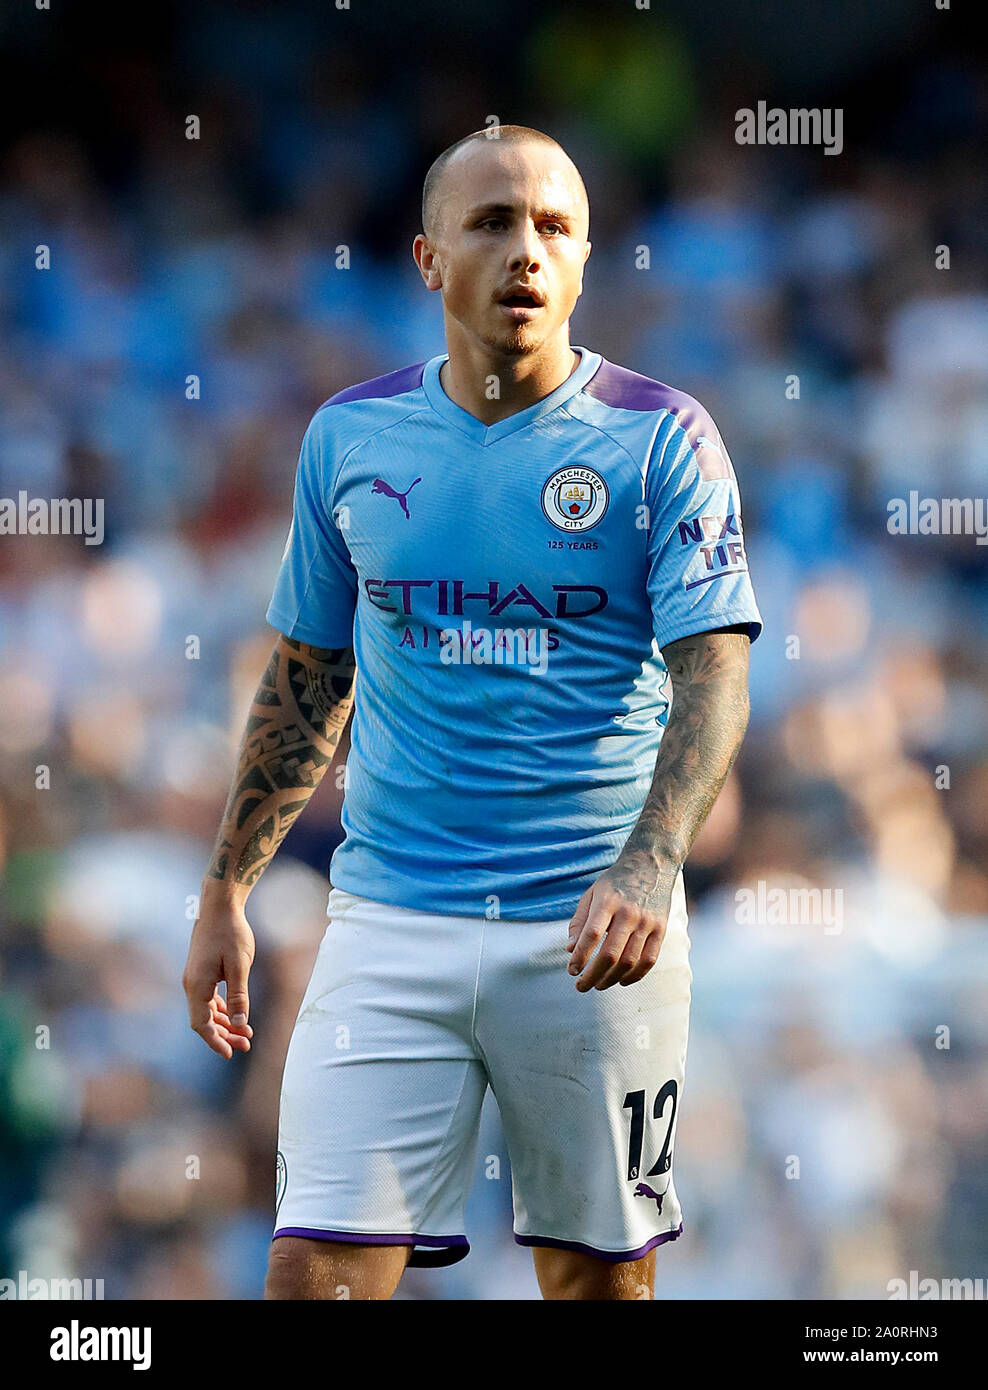 Manchester City S Jose Angelino During The Premier League Match At The Etihad Stadium Manchester Stock Photo Alamy